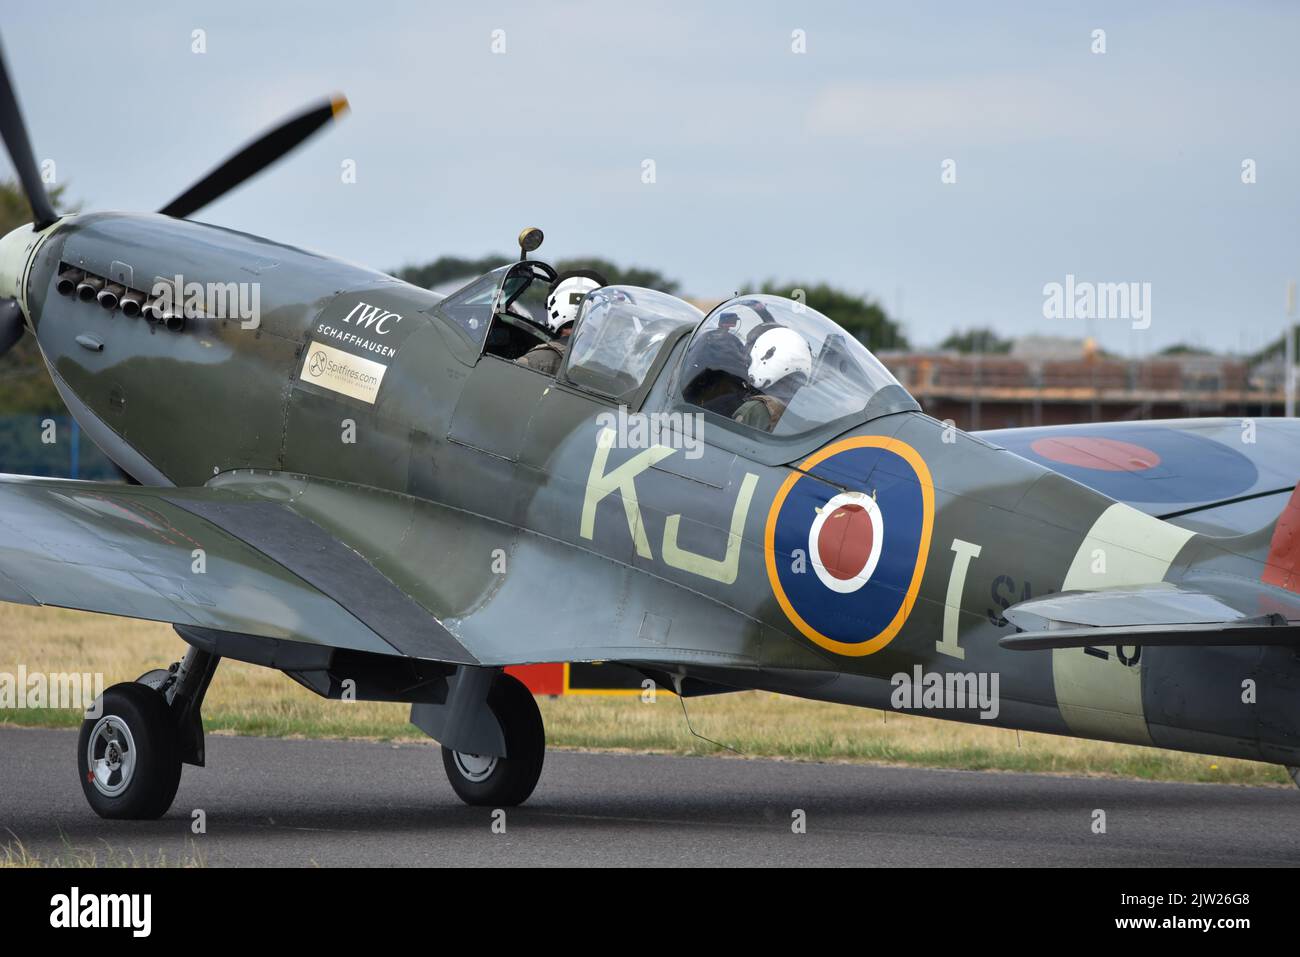 SM250 twin seat Spitfire taxiing on the runway of Solent airport. Taking another passenger on a pleasure flight around the south coast of England. Stock Photo